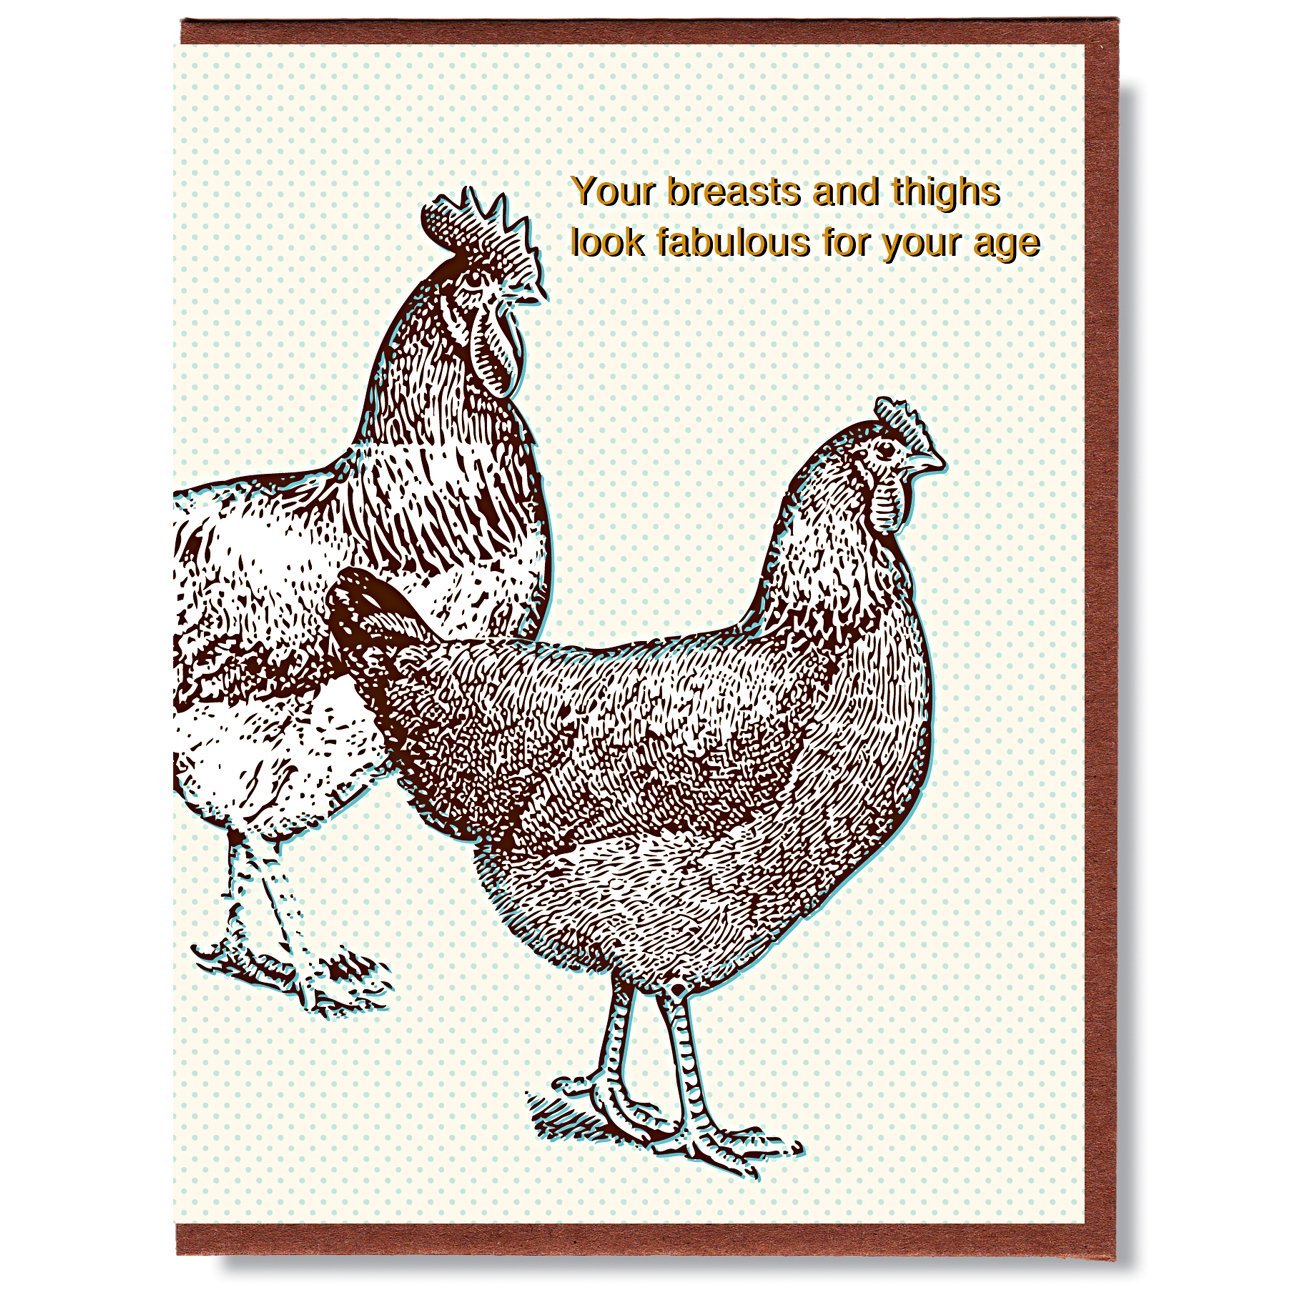 "Fabulous Breasts And Thighs" Greeting Card